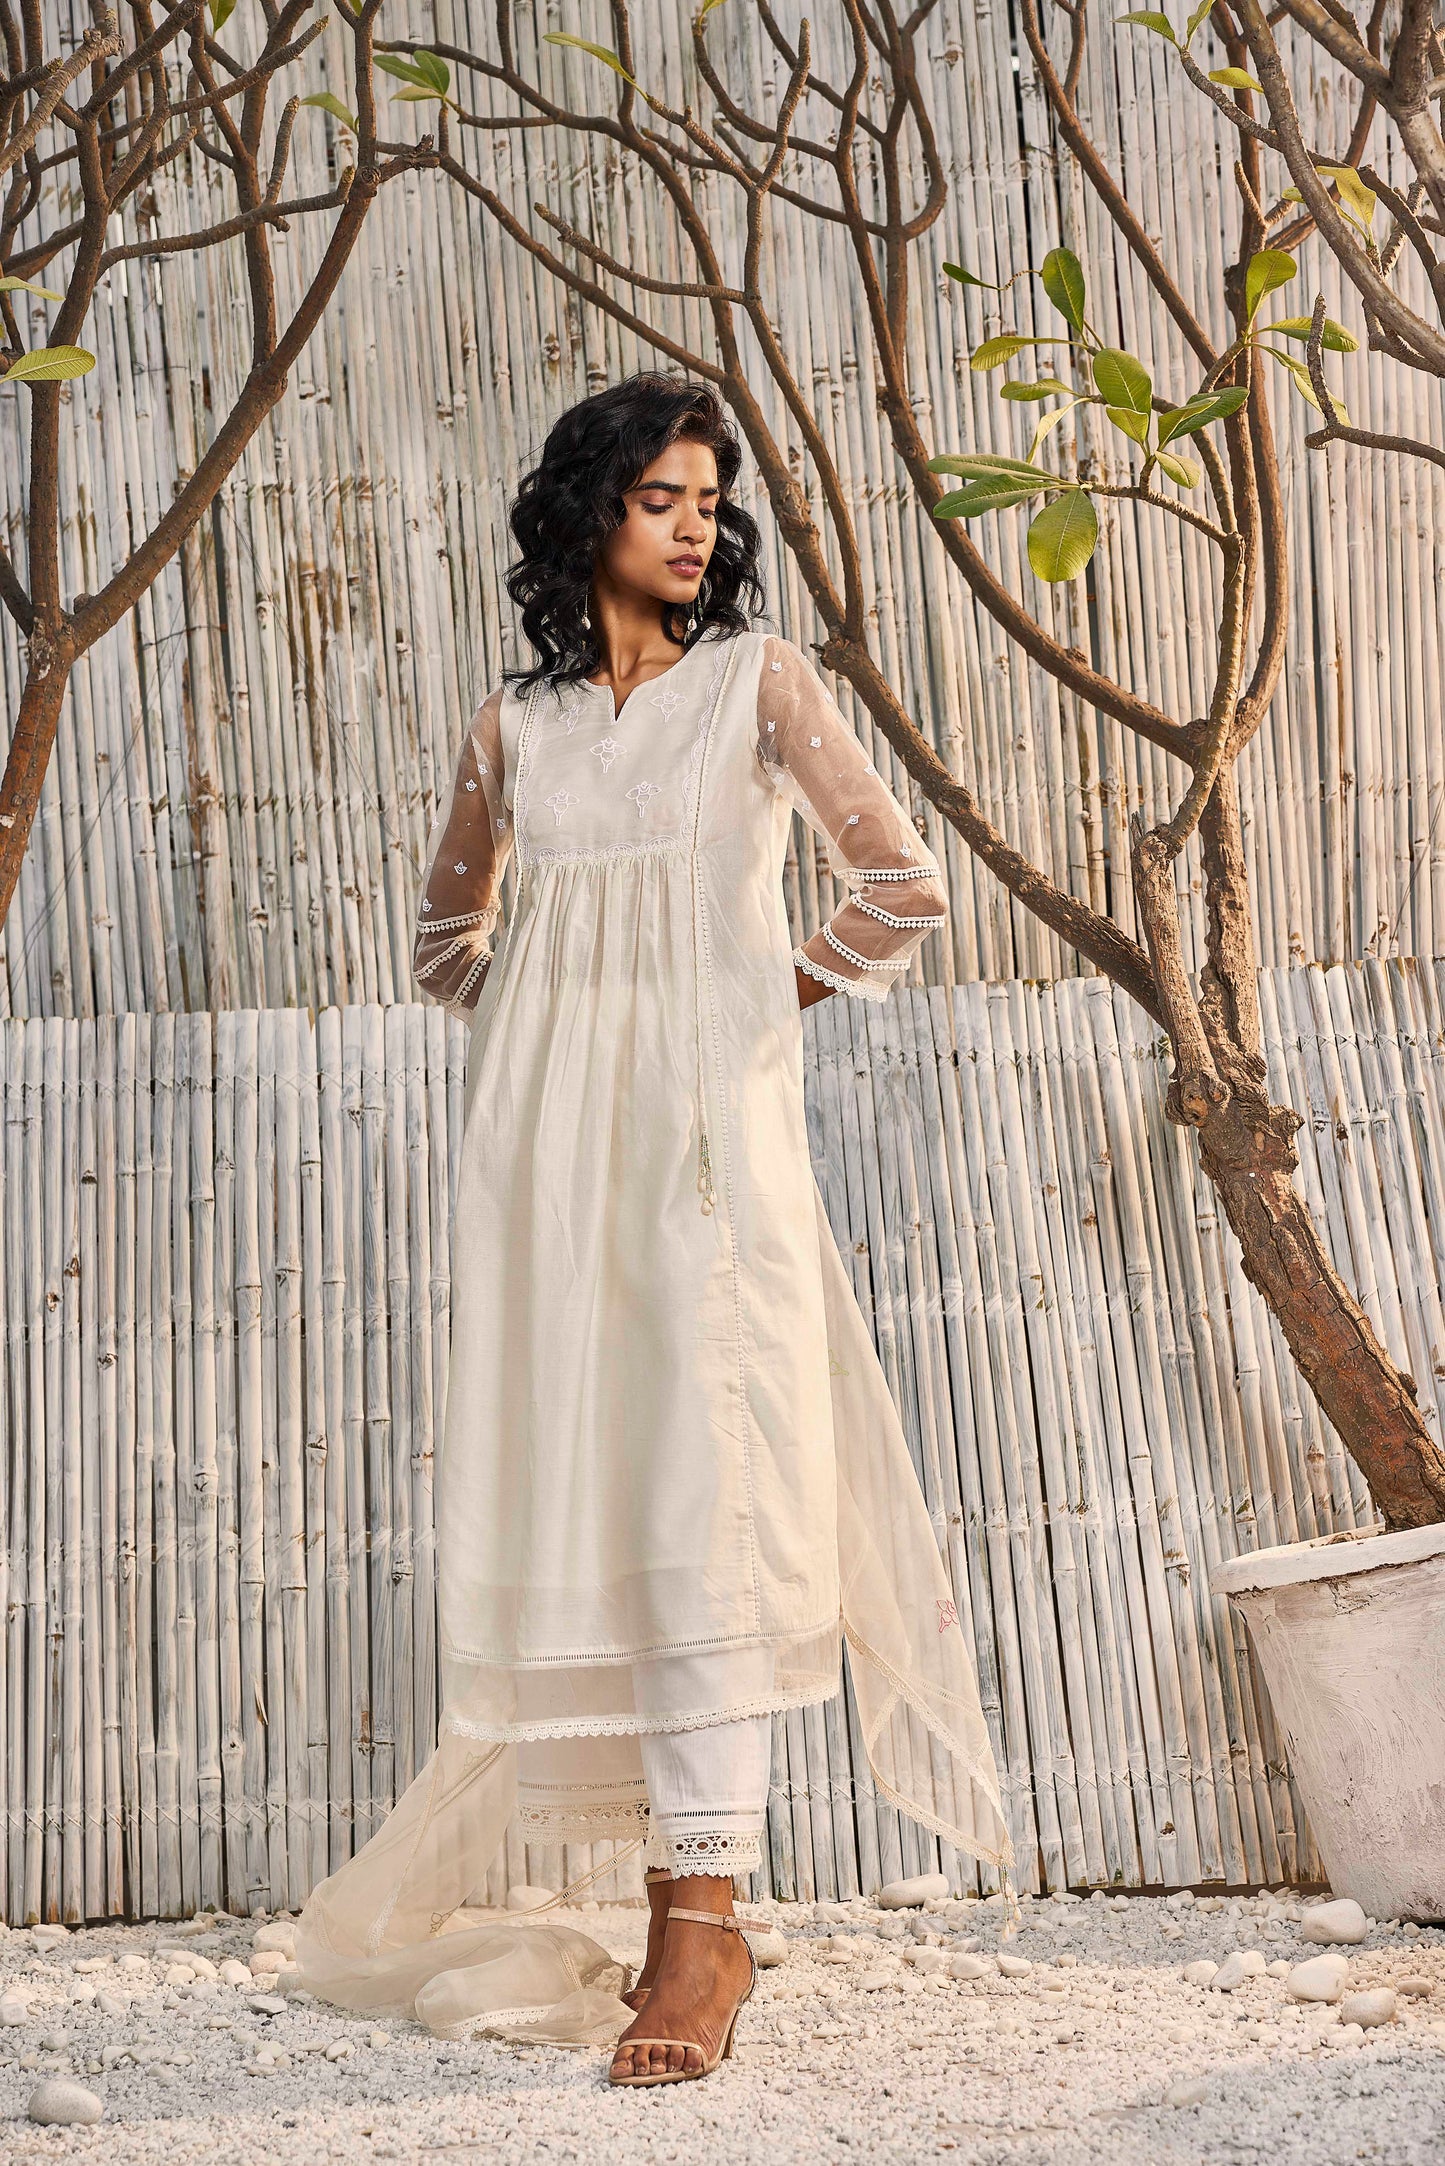 Shell White Chanderi Gathered Kurta with Pant - Set of 2 at Kamakhyaa by Charkhee. This item is Cotton, Cotton Satin, Dobby Cotton, Festive Wear, Indian Wear, Kurta Pant Sets, Natural, Organza, Regular Fit, Shores 23, Solids, Wedding Gifts, White, Womenswear